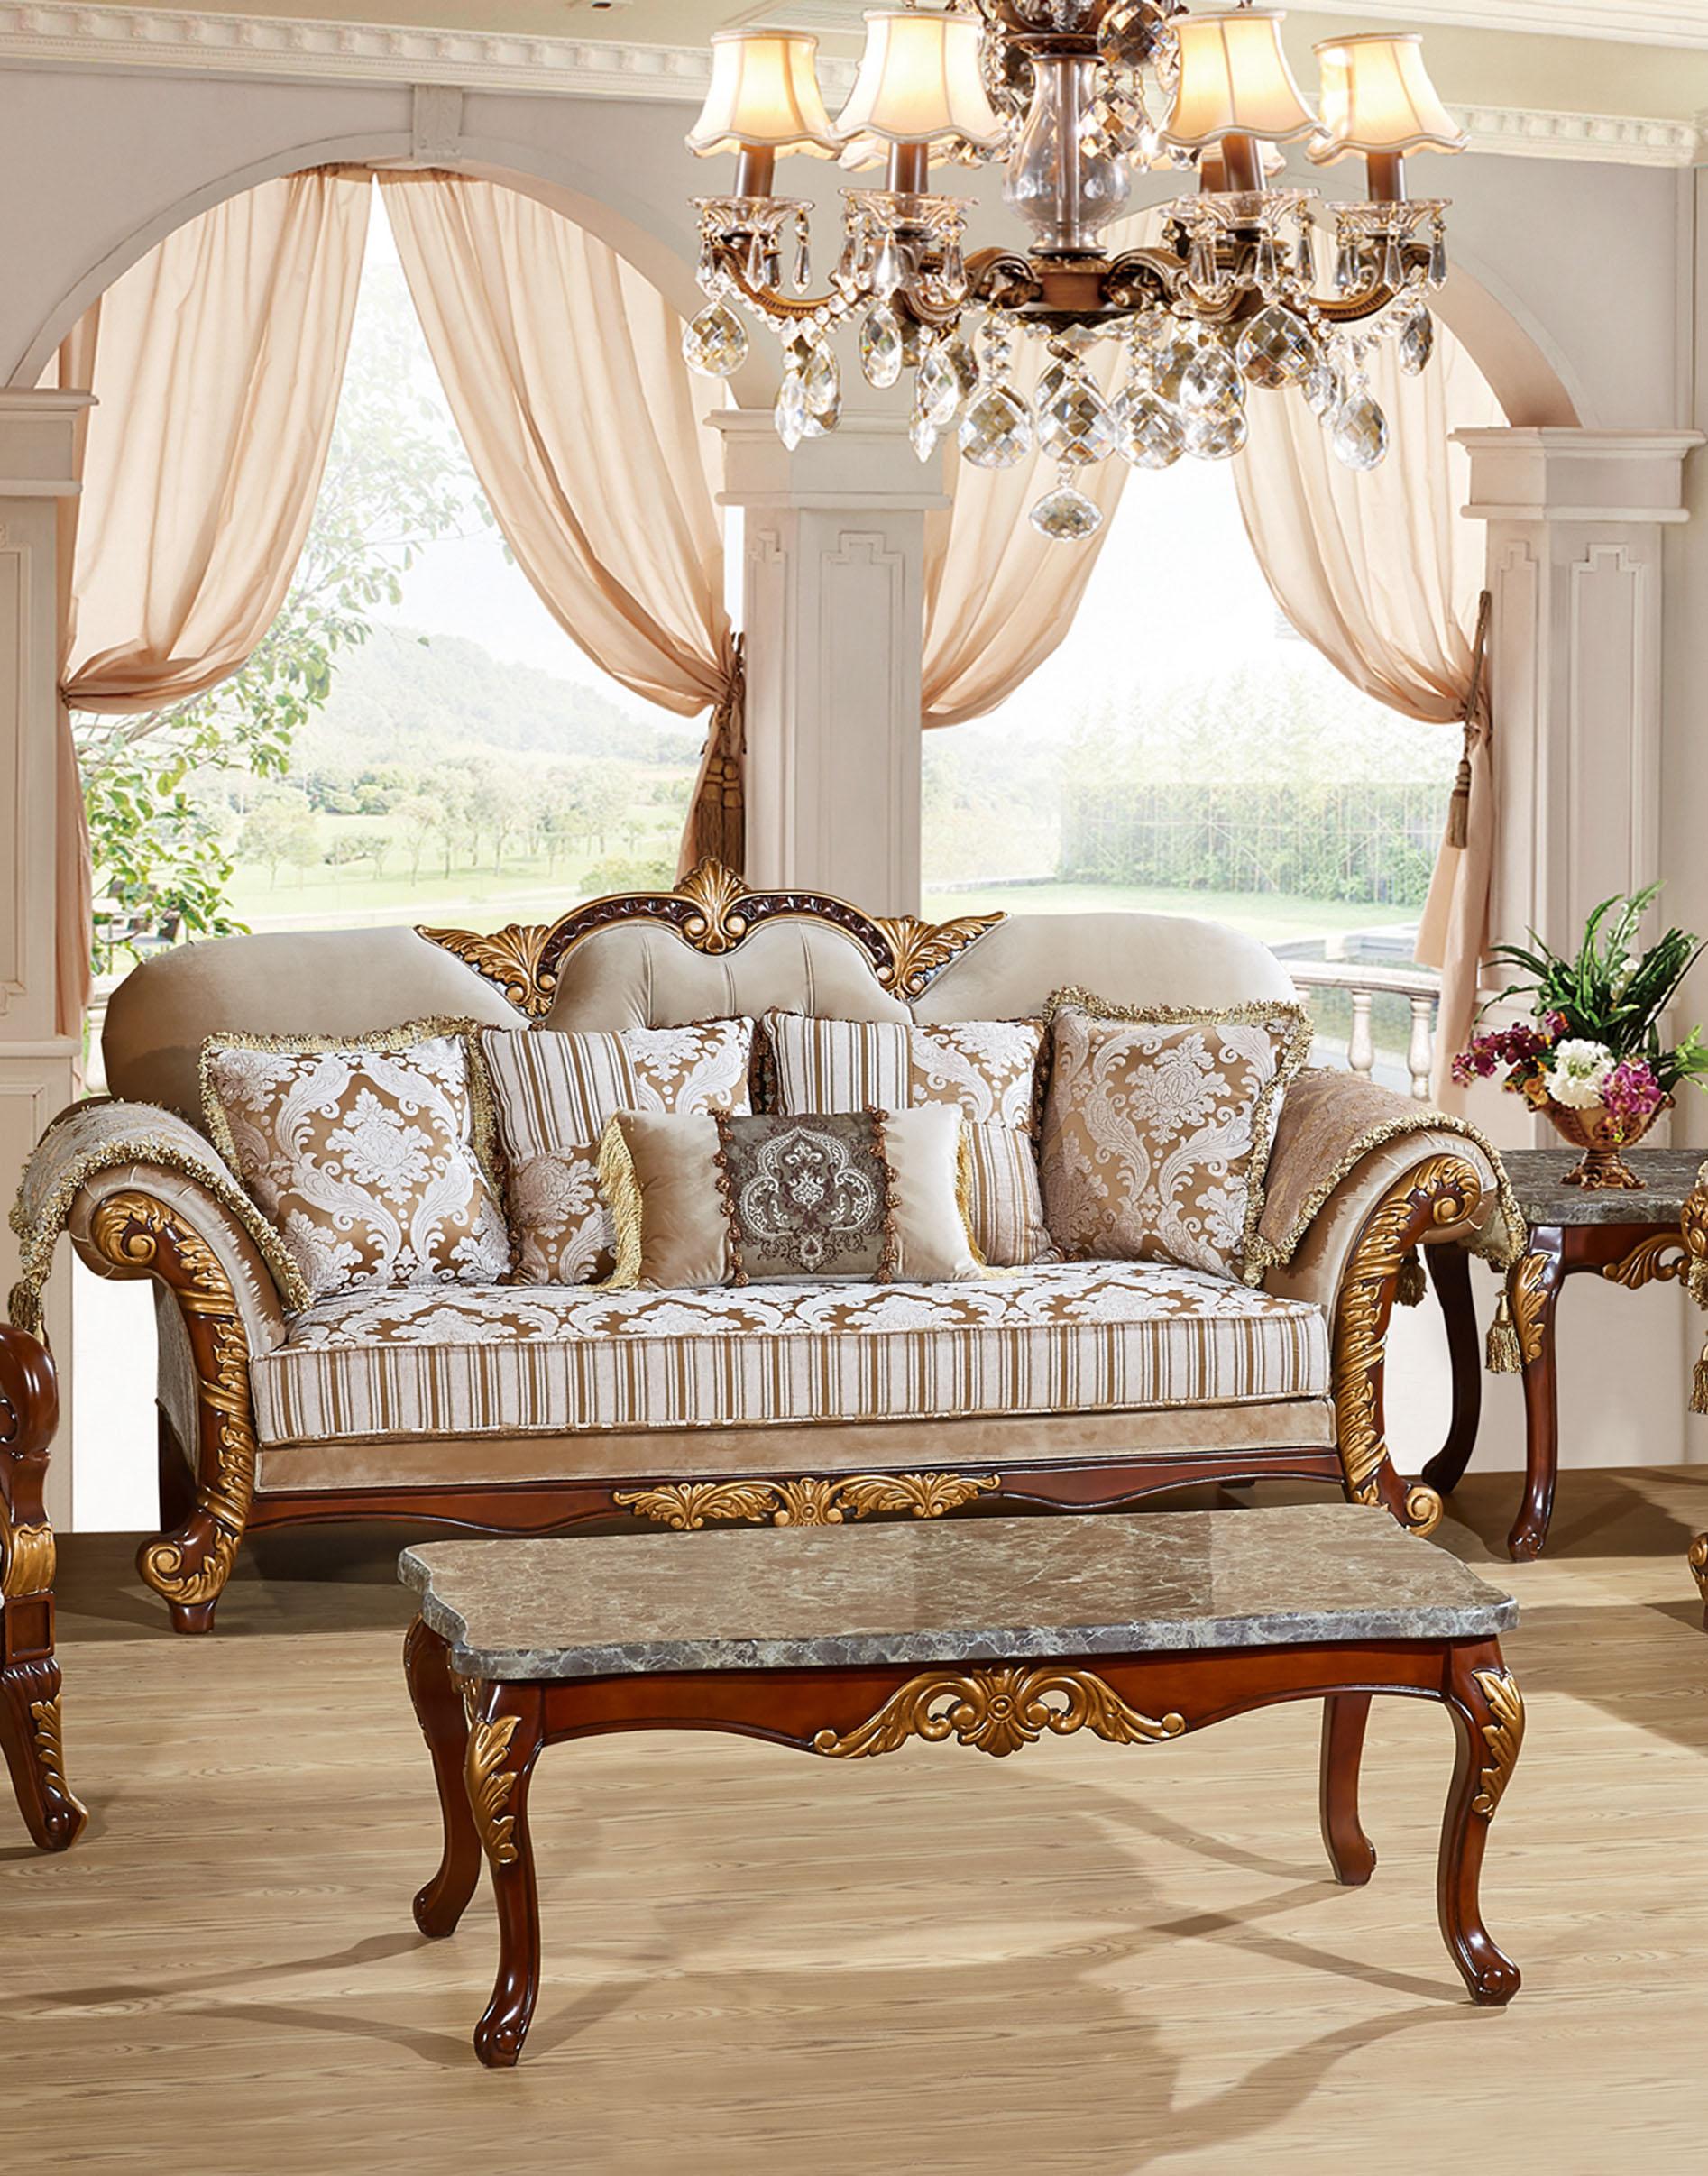 

    
Meridian 651 Camelia Cream w/Gold Living Room Sofa Carved Wood Traditional
